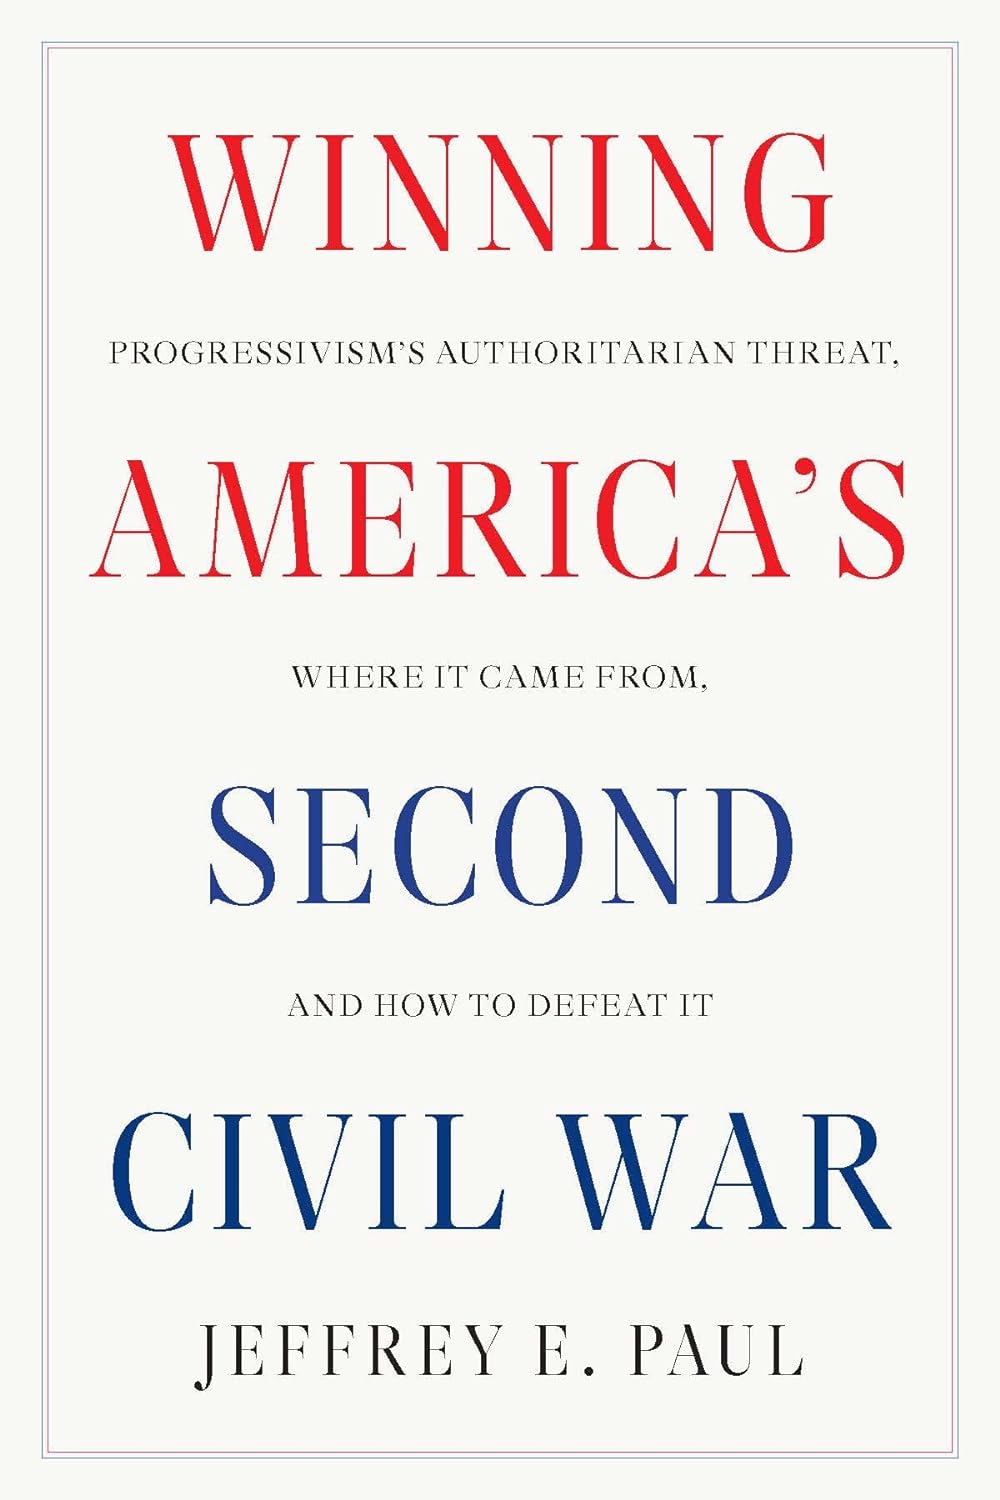 Book cover for "Winning America's Second Civil War" by Jeffrey E. Paul